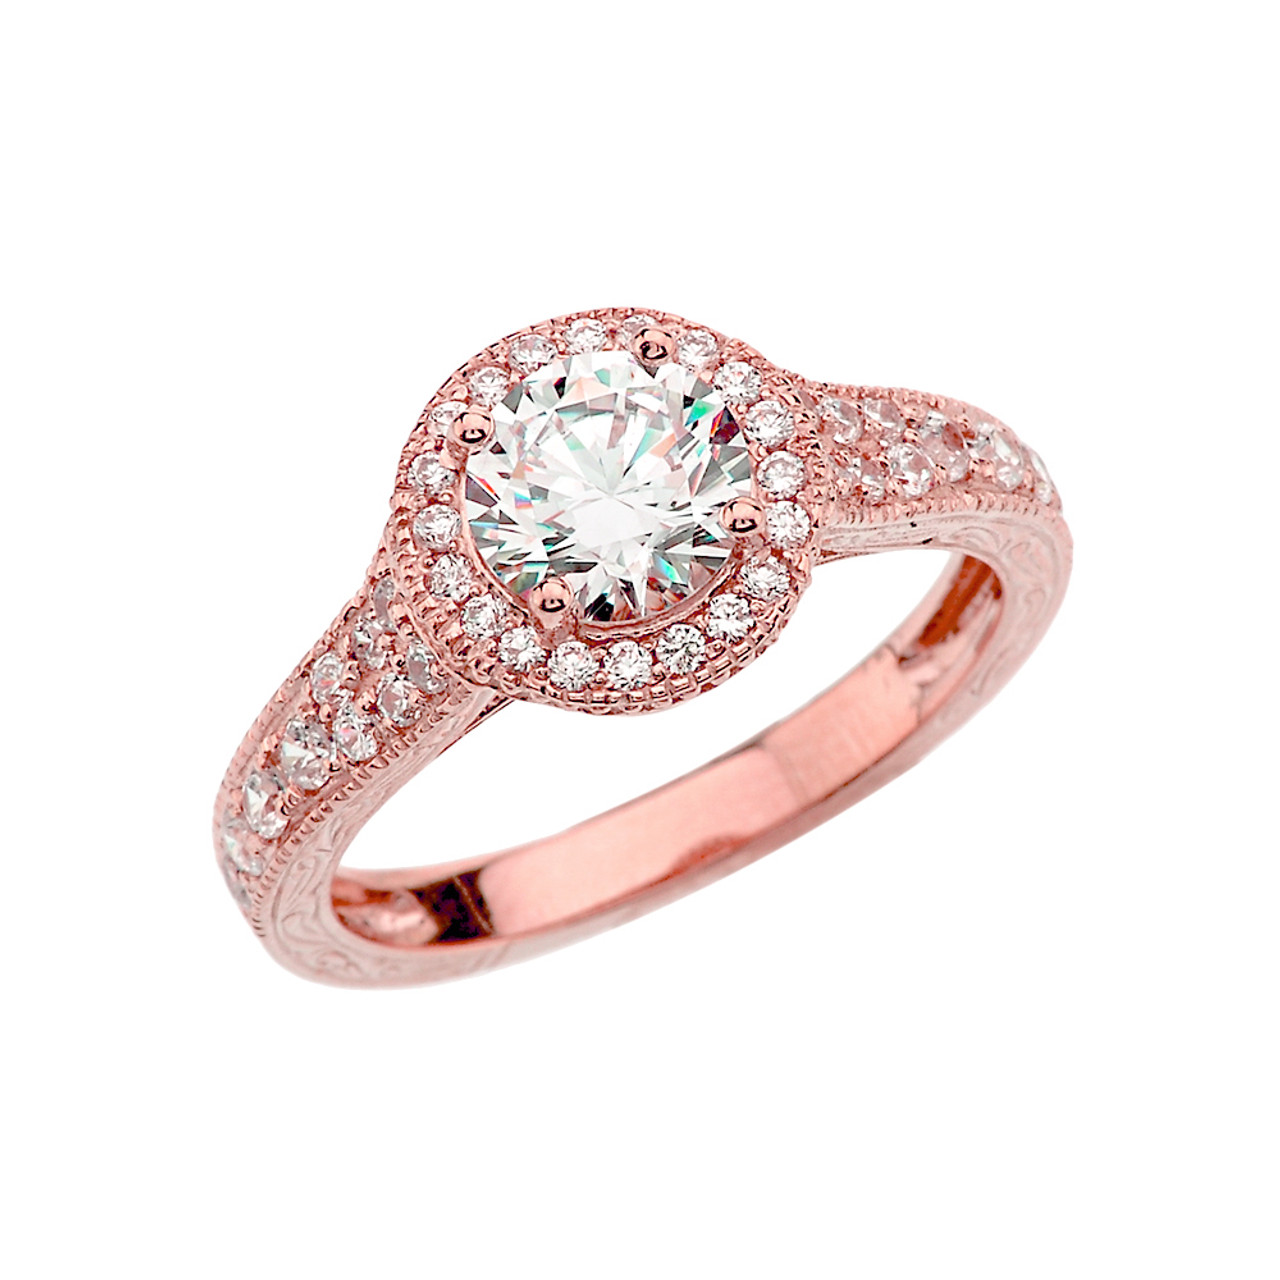  Rose  Gold  Art Deco Engagement  Anniversary Ring  With Cubic  